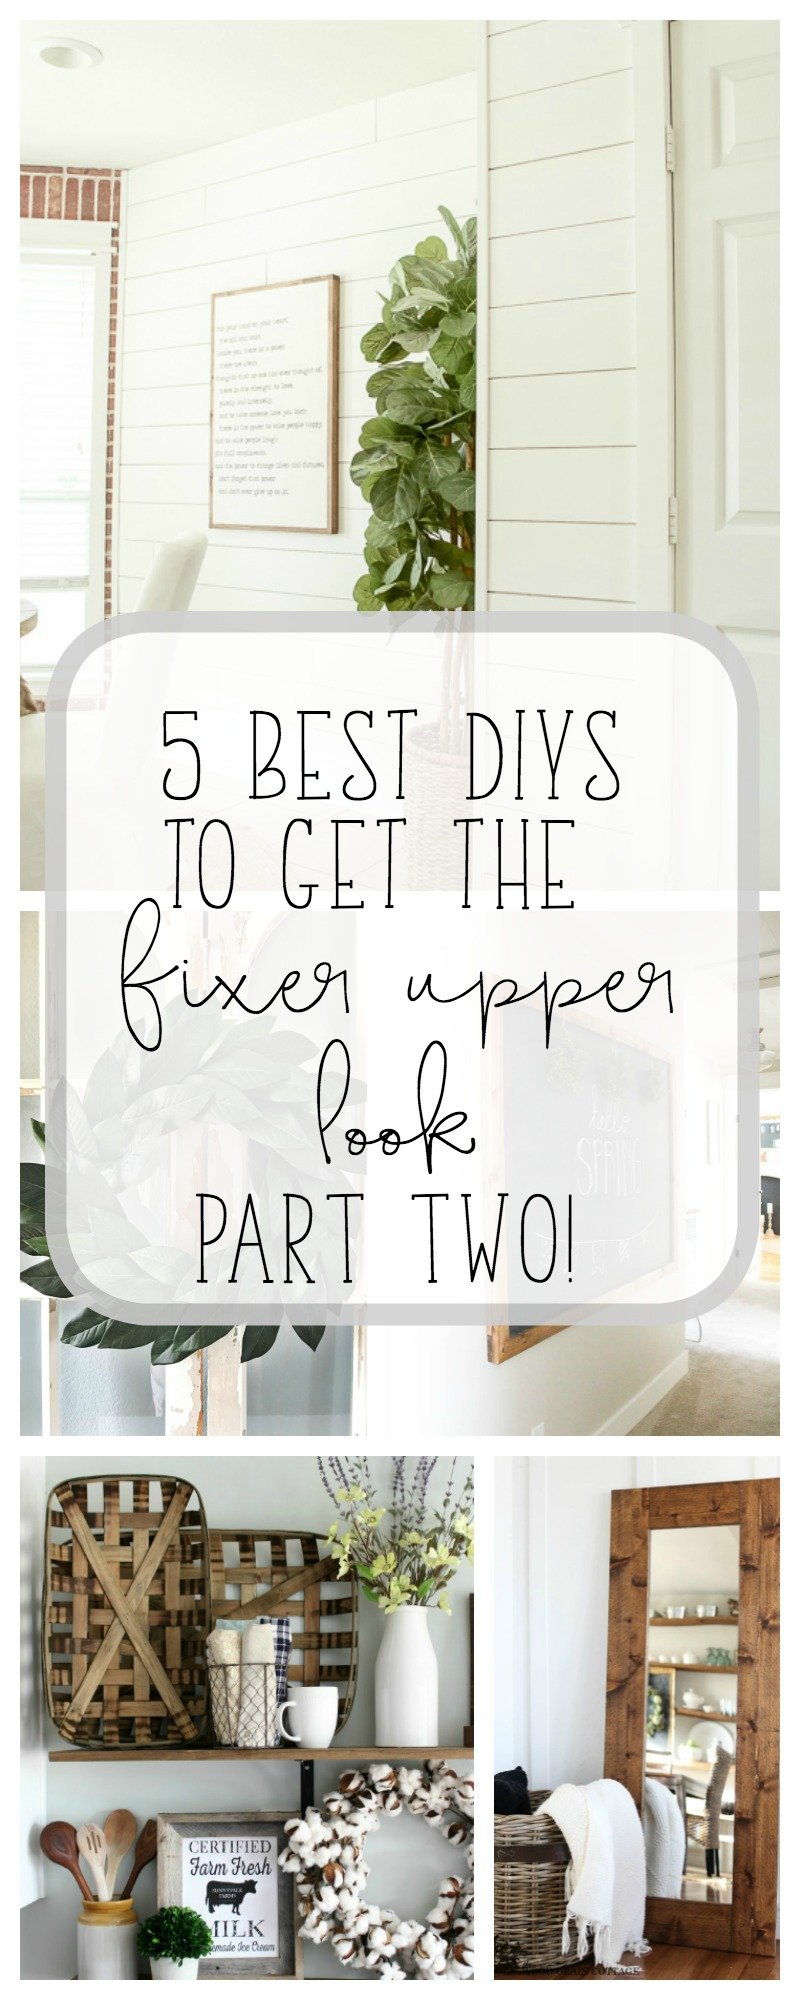 5 Best DIYs to get the Fixer Upper Look - Part Two! - Making Joy and ...